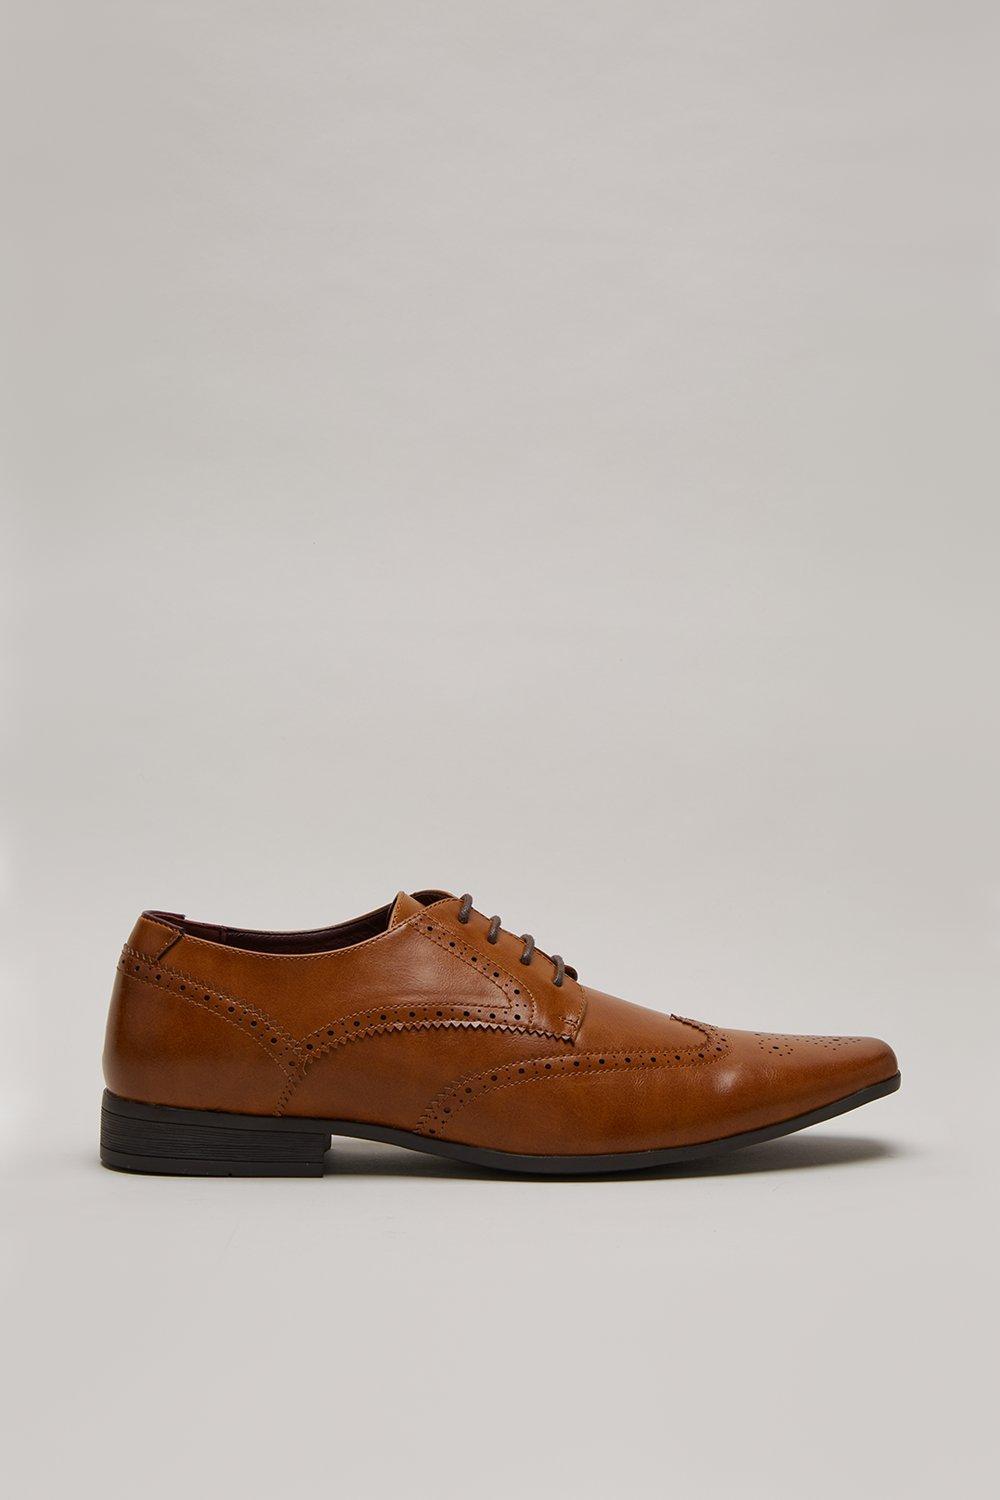 Mens Tan Leather Look Brogue Shoes - 9